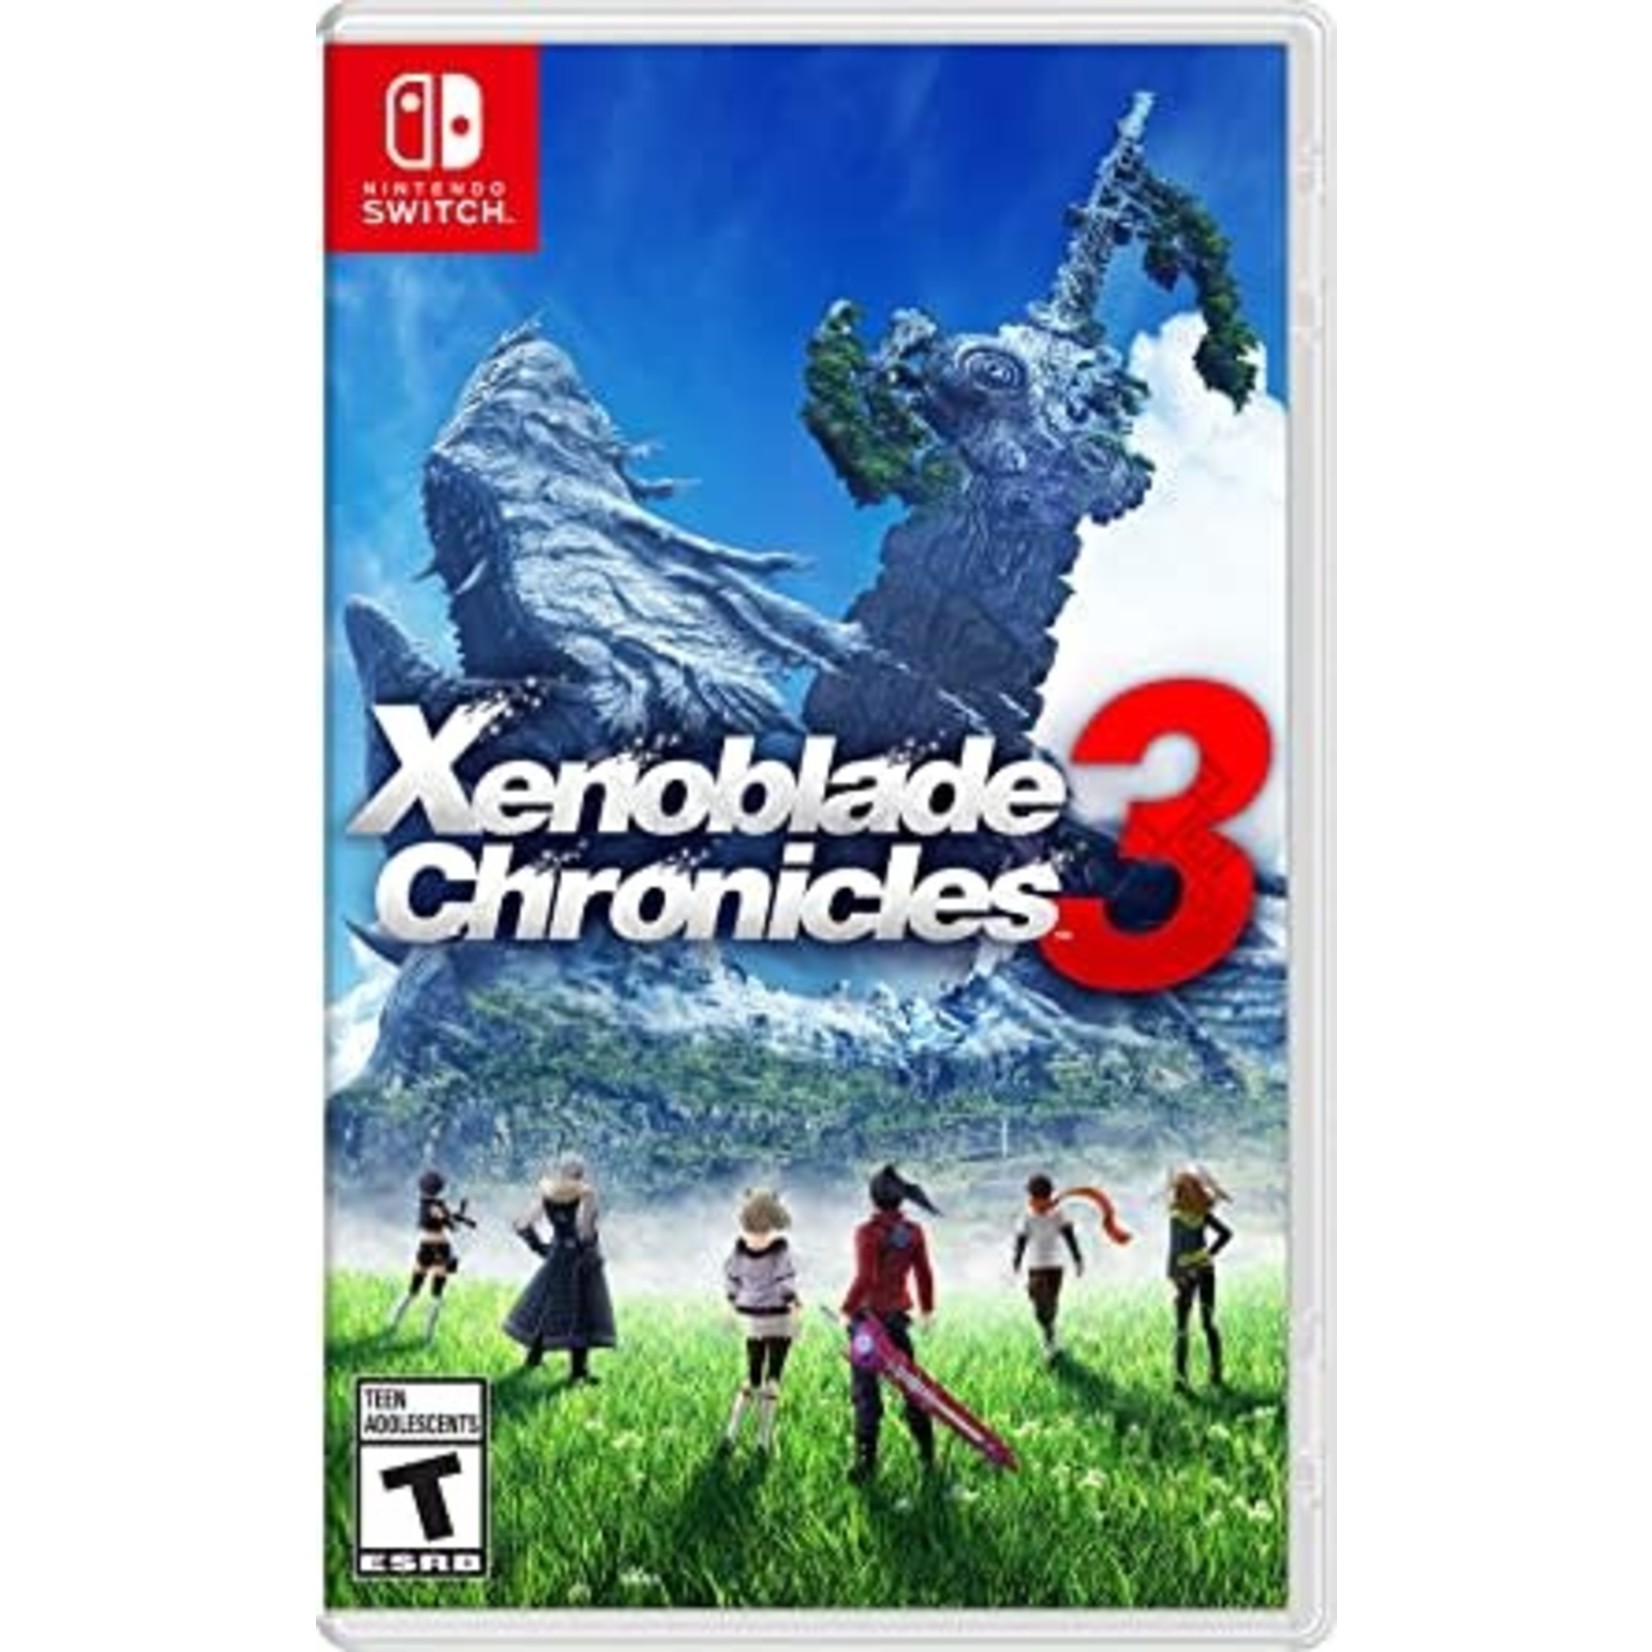 SWITCH-Xenoblade Chronicles 3